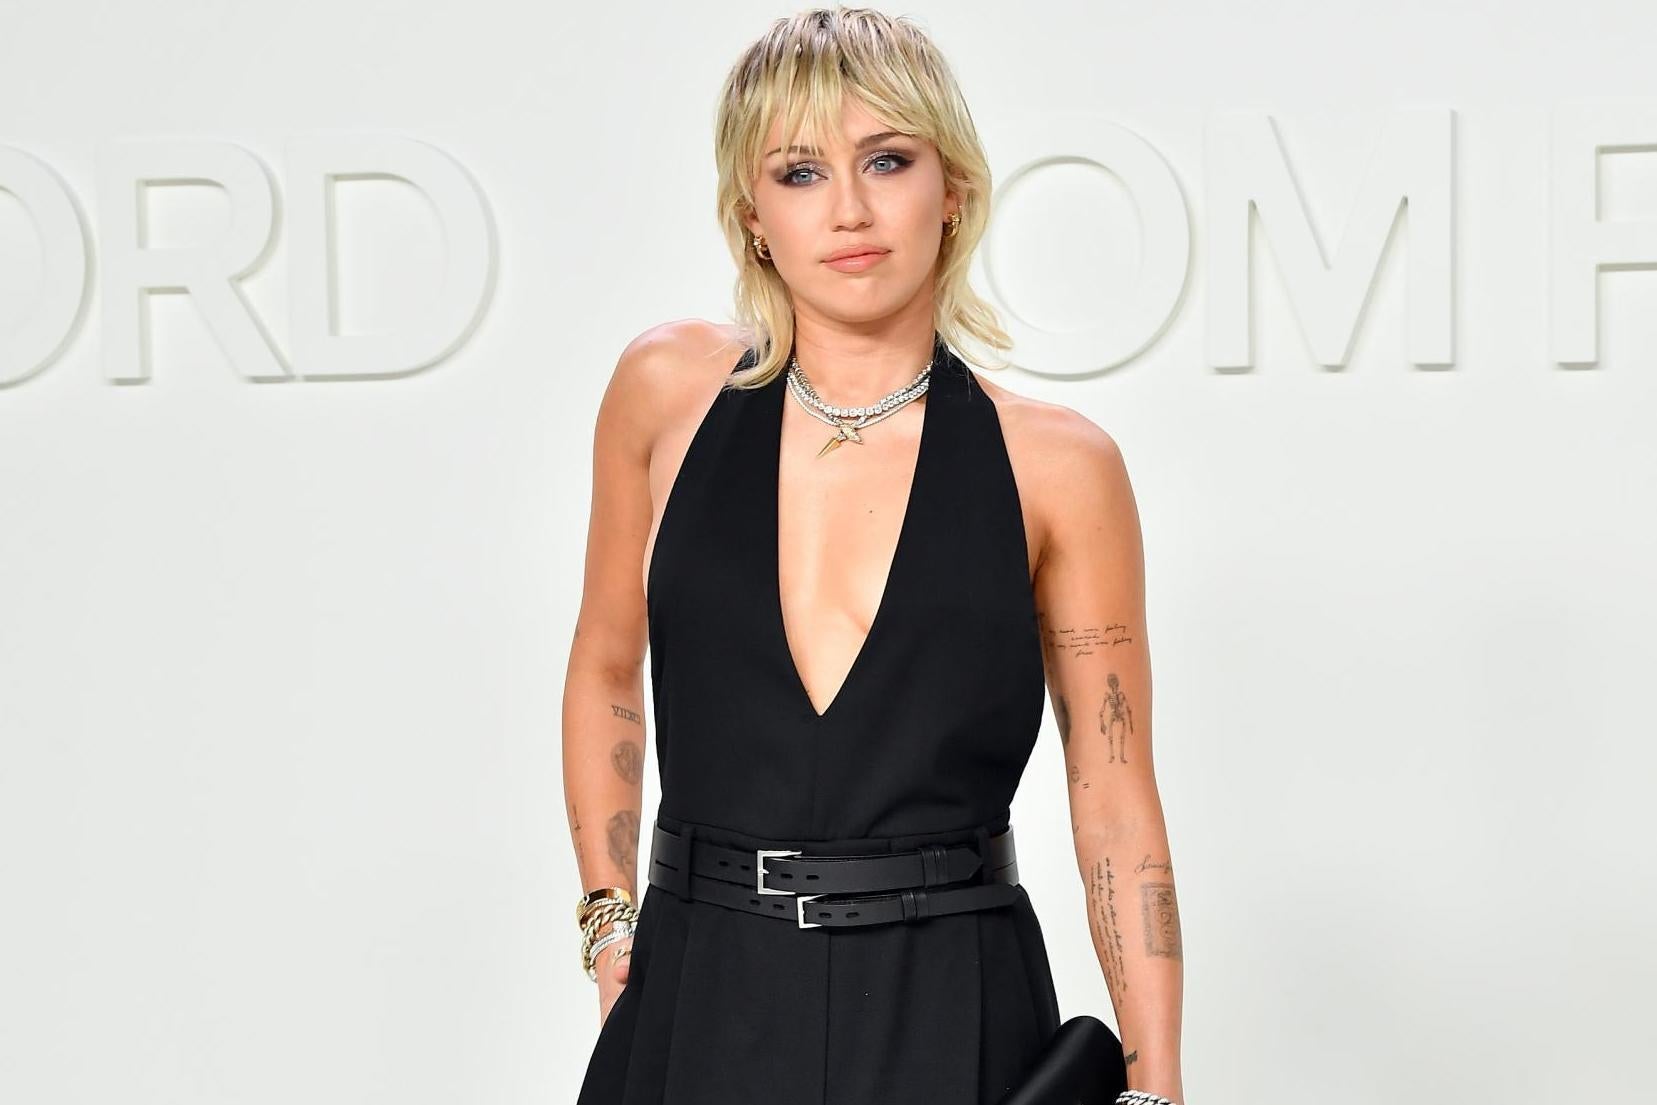 Miley Cyrus says she 'has no idea what this pandemic is like' (Getty)